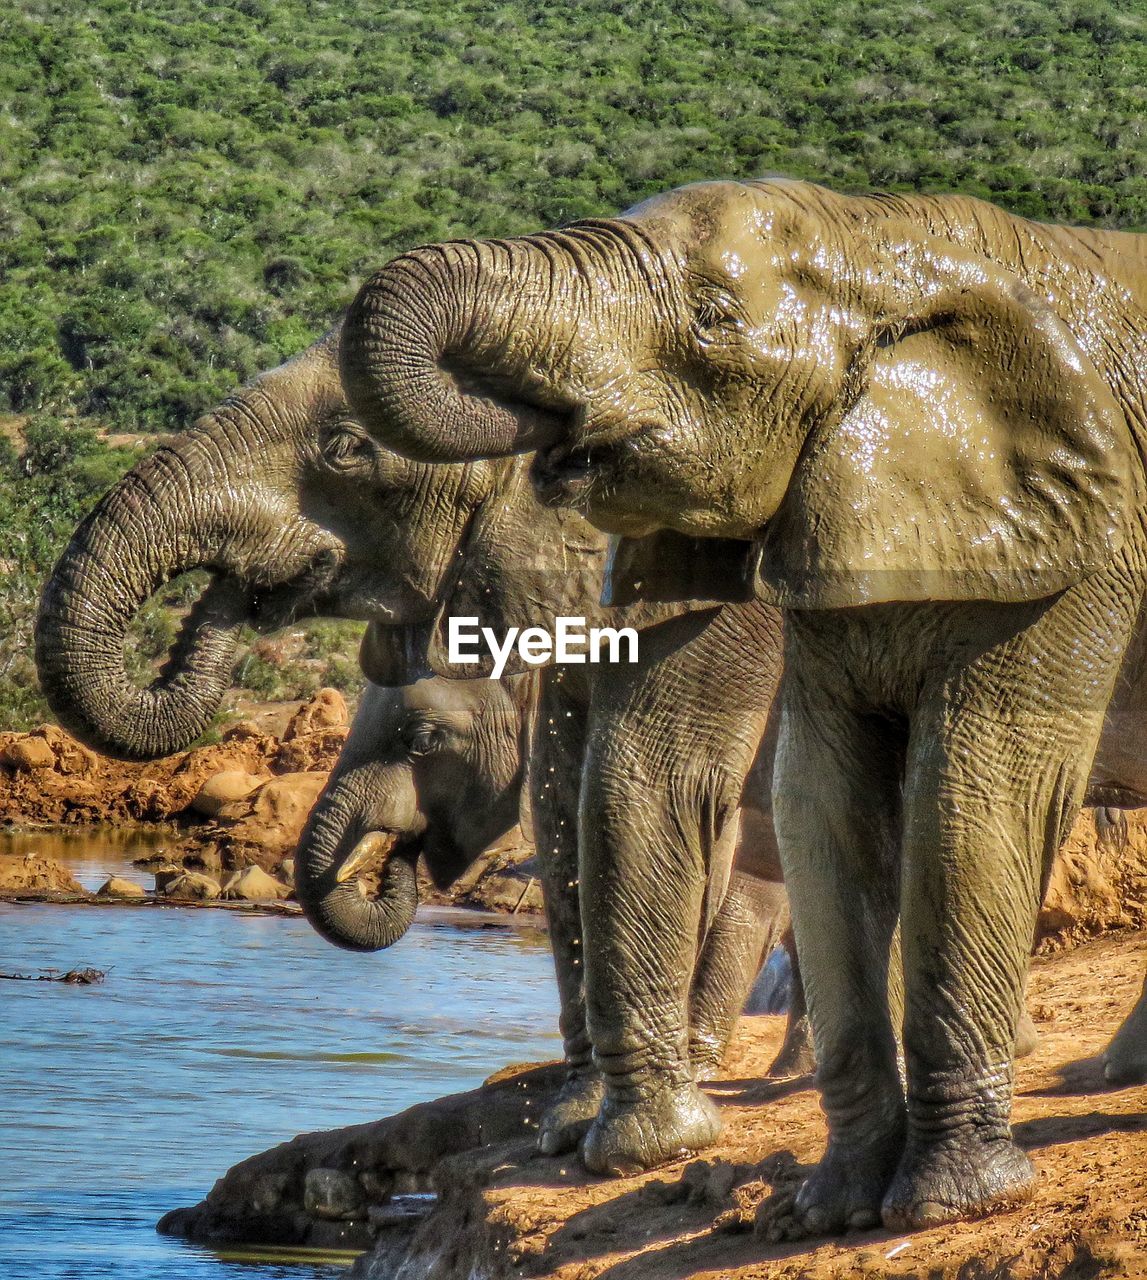 ELEPHANT DRINKING WATER FROM A LAKE